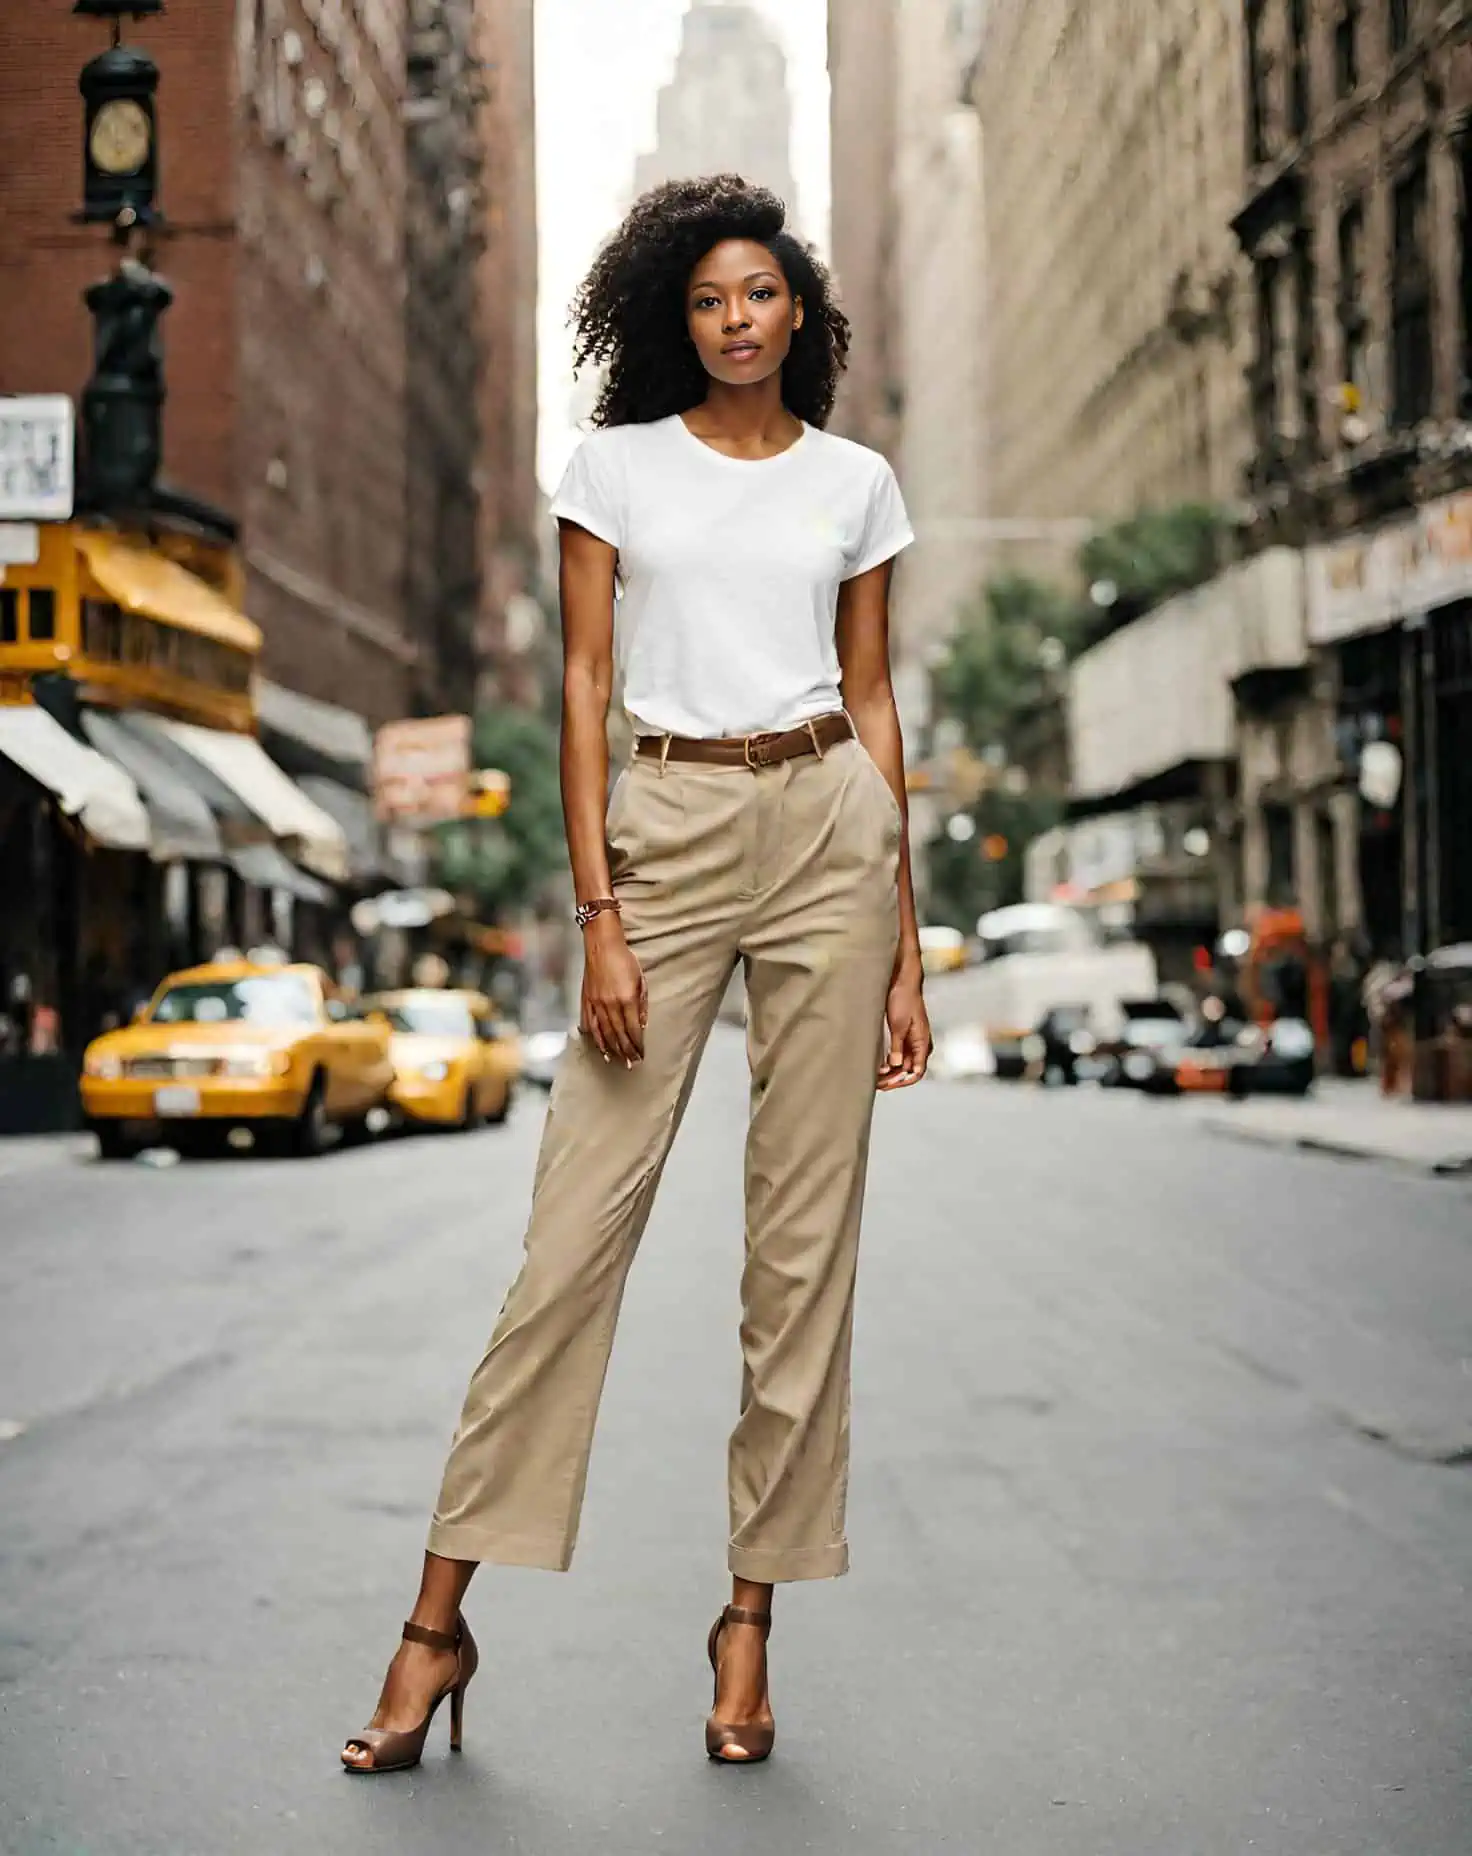 Stylish Beige Pants Outfit Ideas. How to Wear Beige Hues Pants for